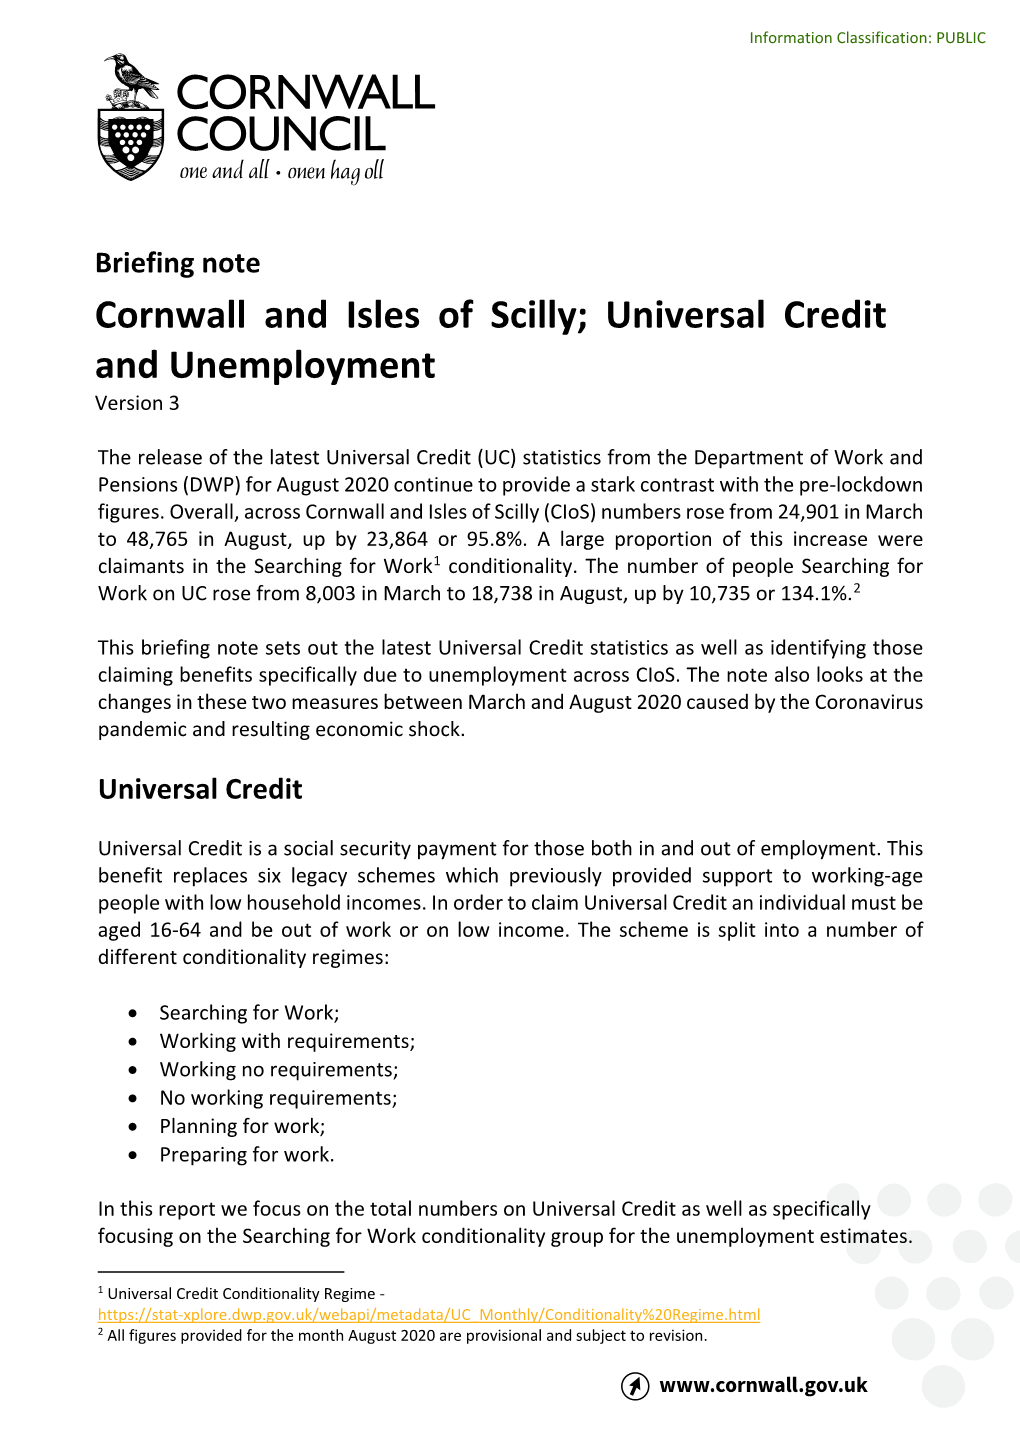 Universal Credit and Unemployment at LSOA